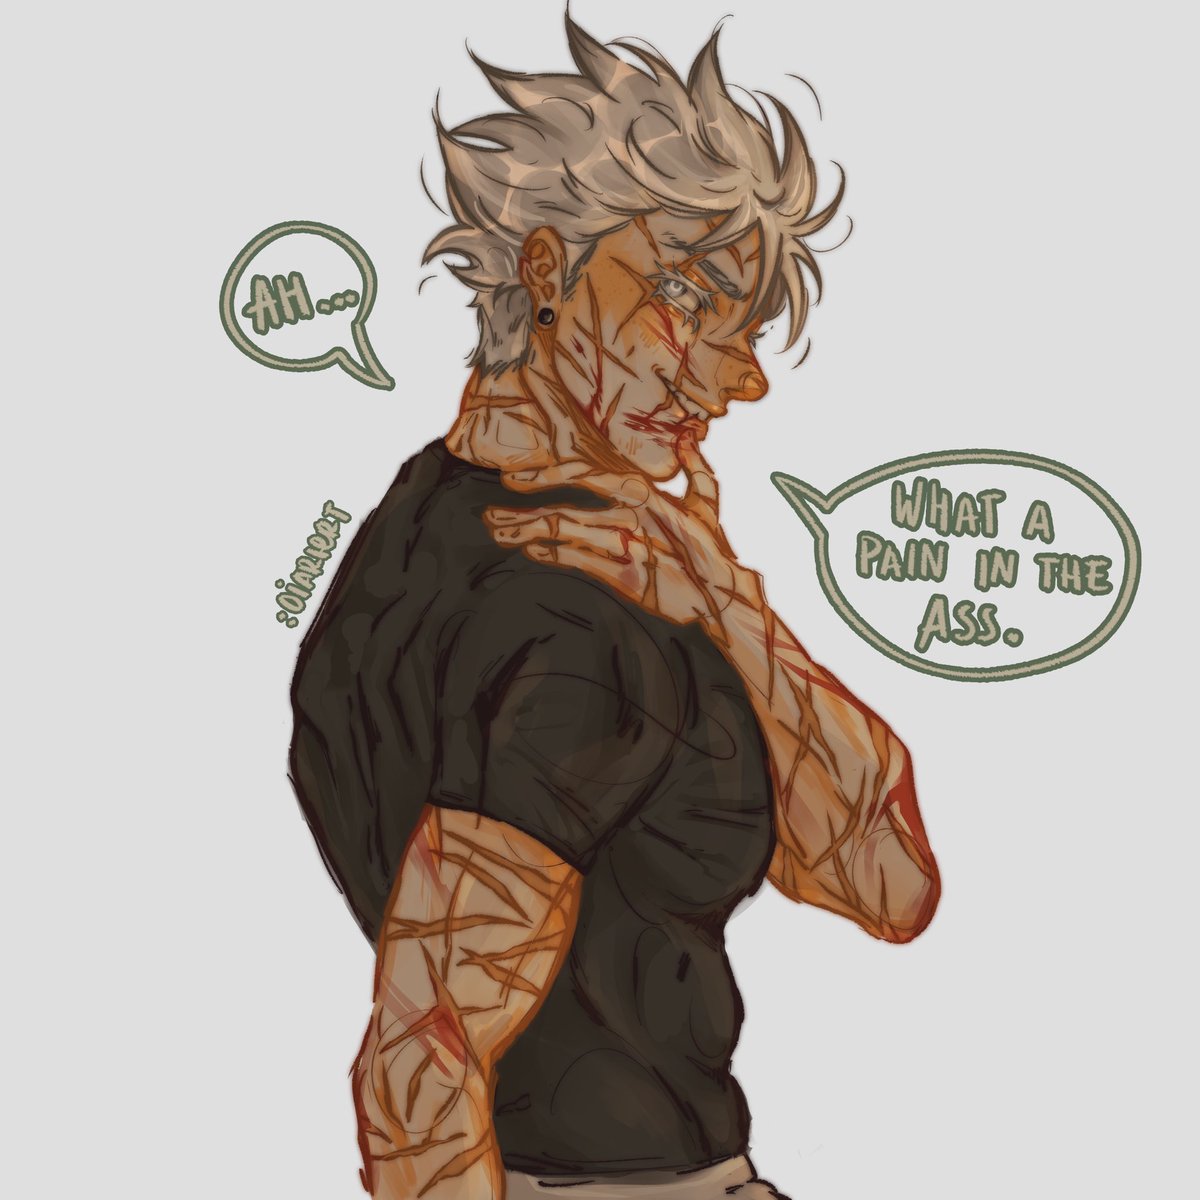 “hes so hot” and it’s a man covered in scars and blood — #JJK226 #GojoSatoru